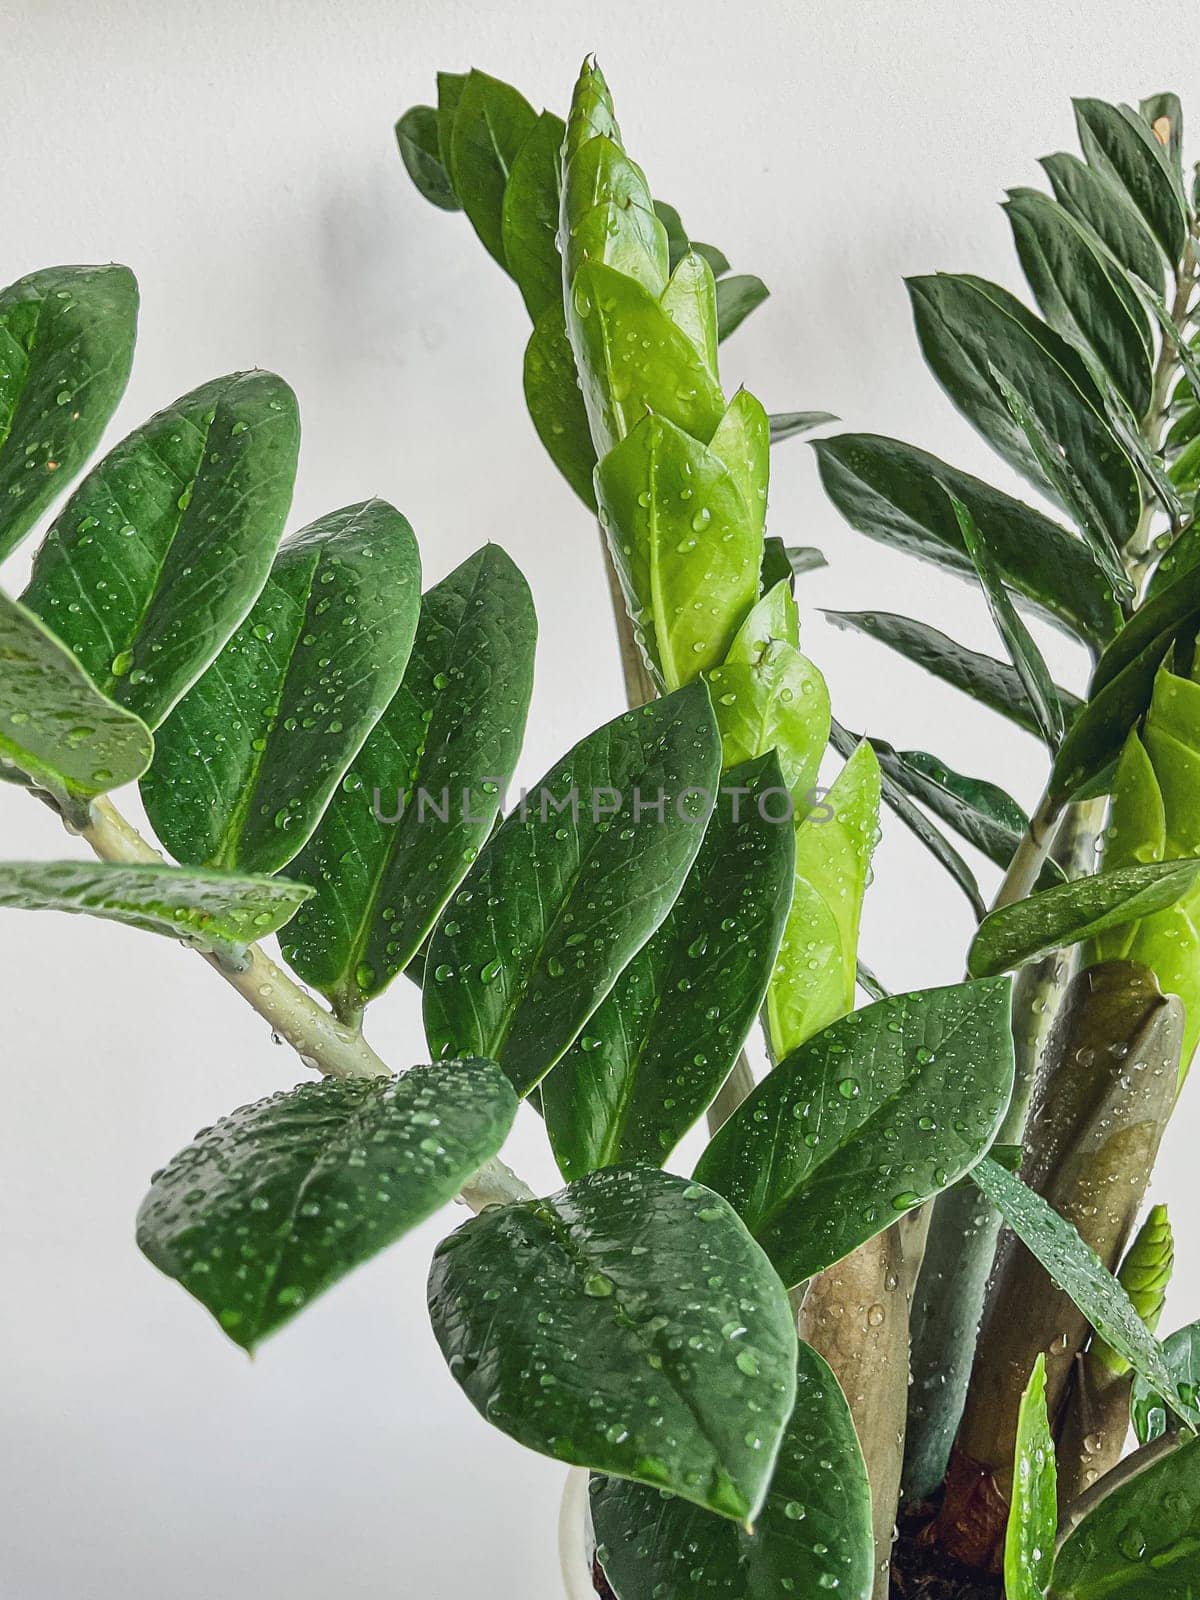 Zamioculcas zamifolia- dollar tree. Zanzibar Gem The tree is named auspicious. Suitable for decorating your home and office.